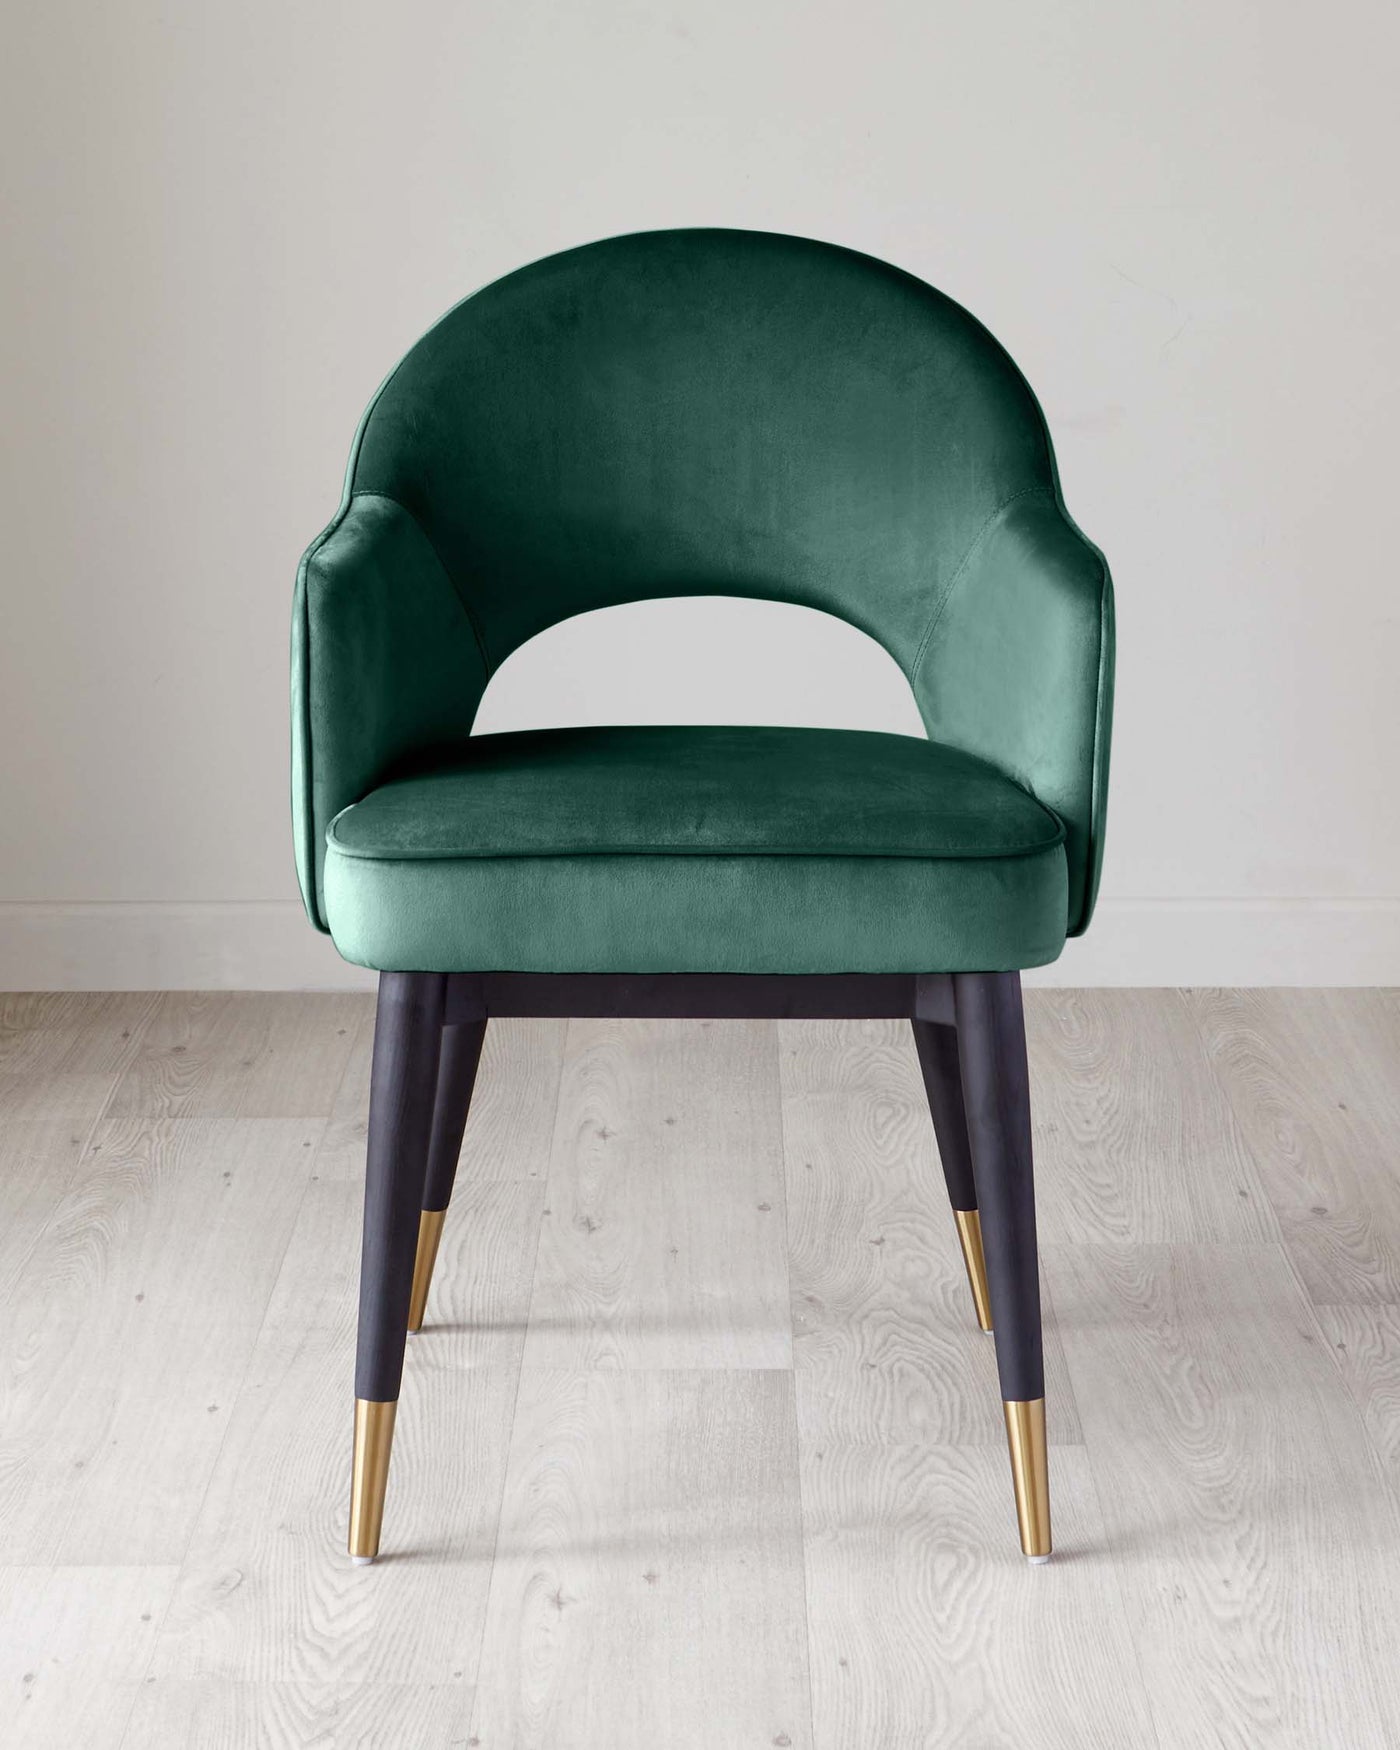 Elegant dark green velvet accent chair with a rounded backrest, plush seating, and tapered dark wooden legs with gold metal tips on a light wooden floor.